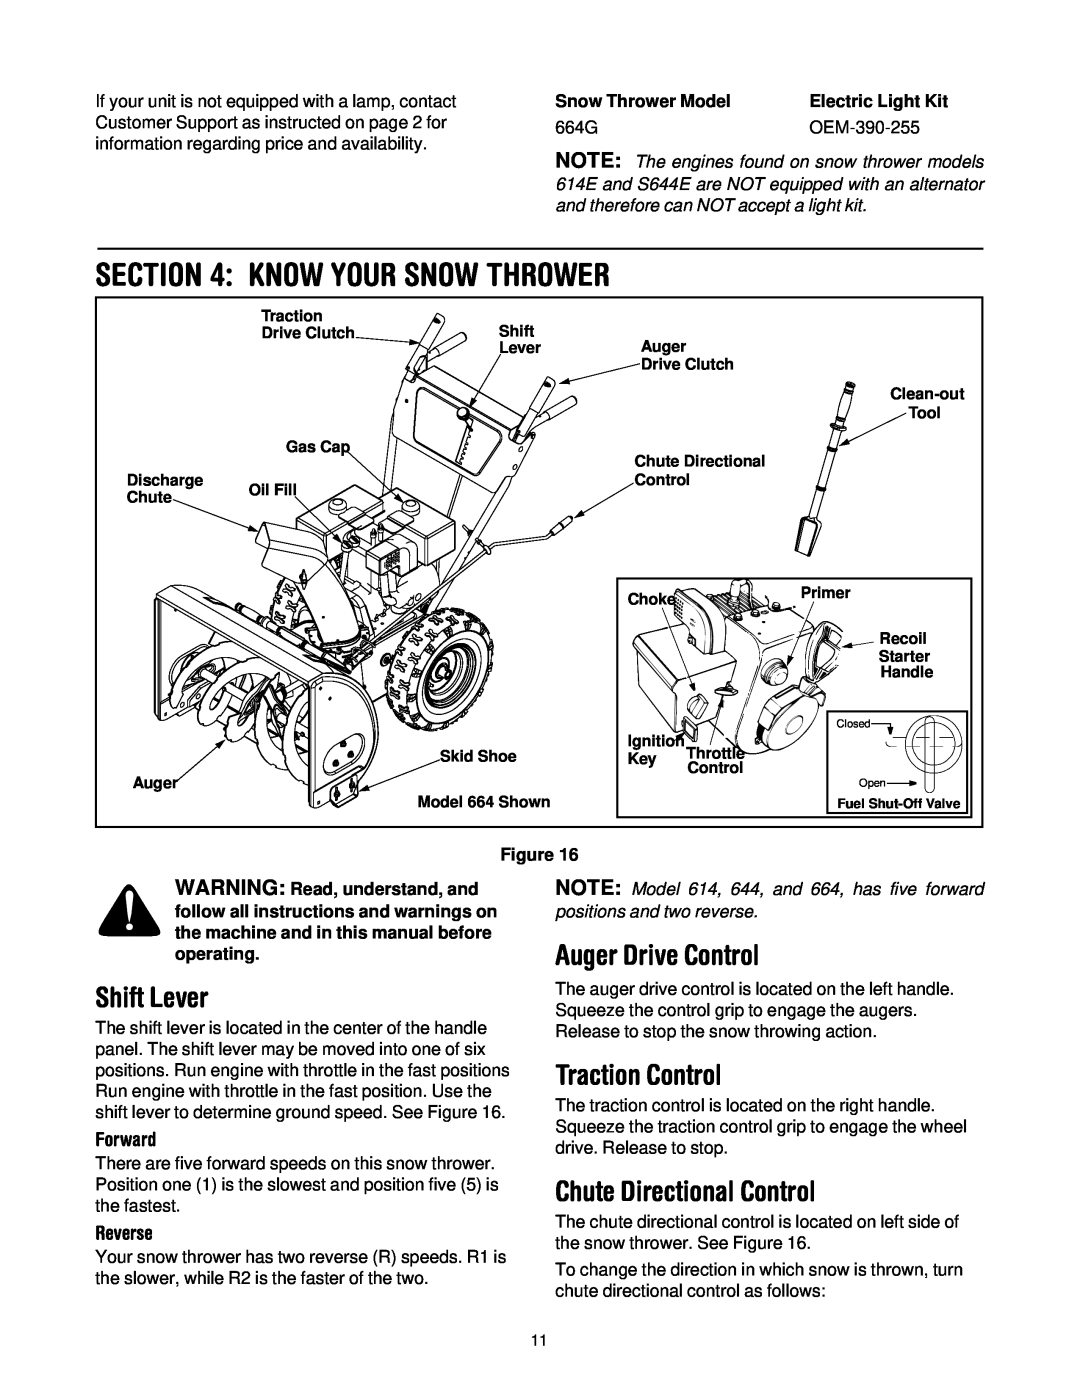 MTD 614E Know Your Snow Thrower, Shift Lever, Auger Drive Control, Traction Control, Chute Directional Control, Forward 